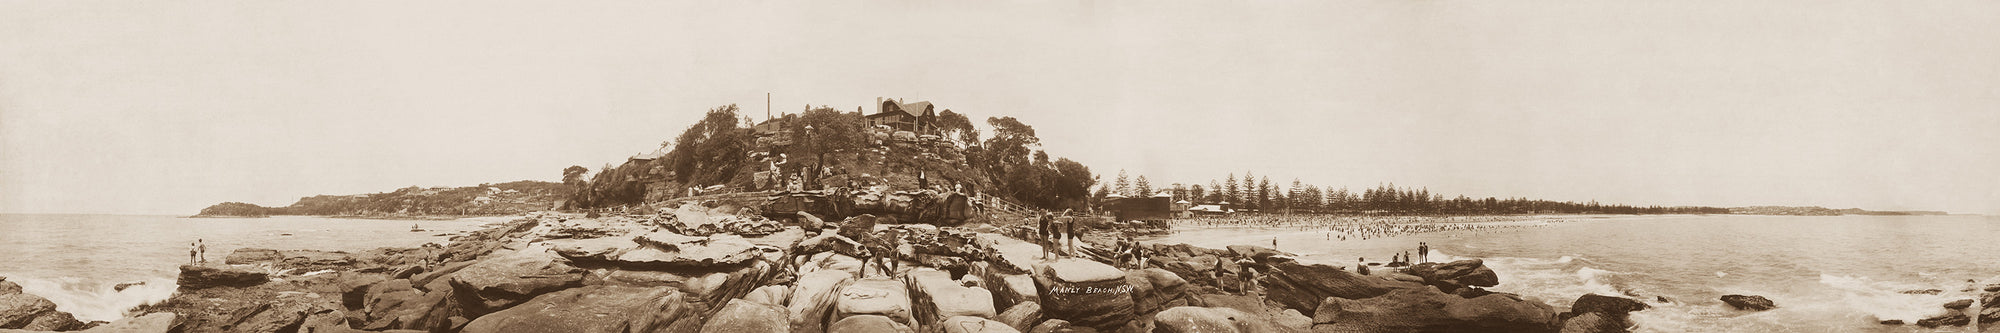 View Of Manly And Shelly Beach, Manly NSW Australia 1924